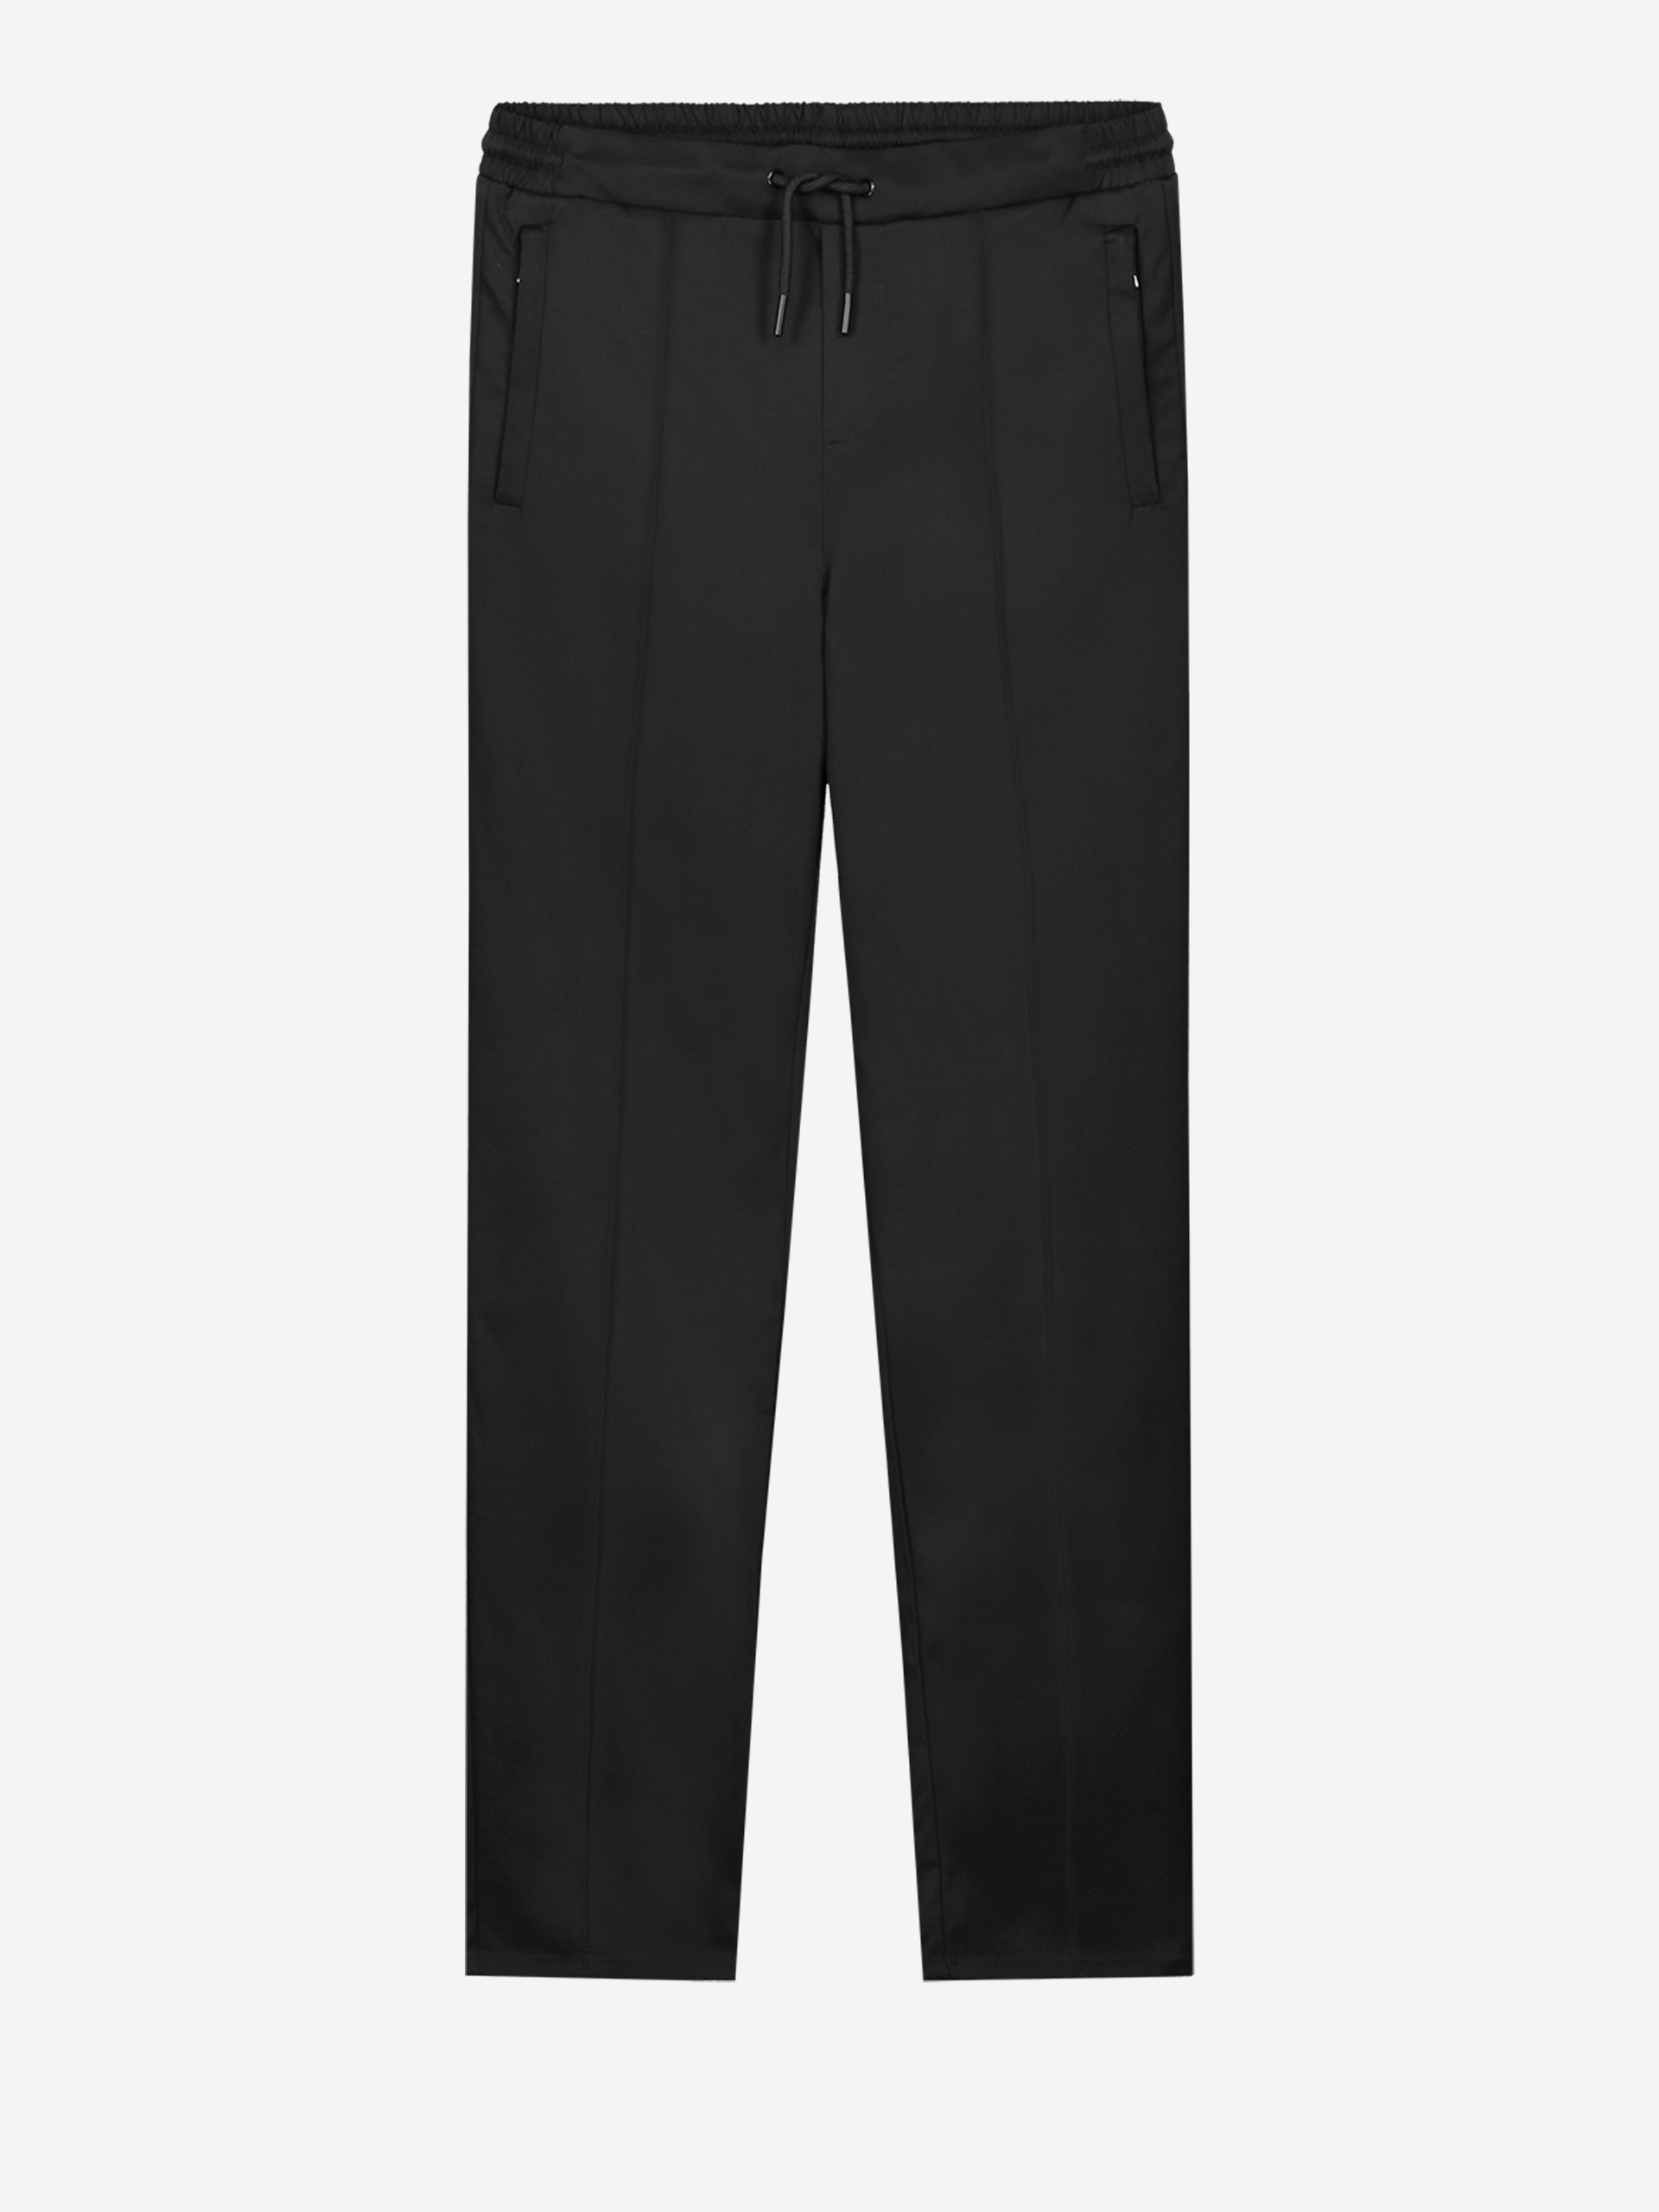 Trousers with cord